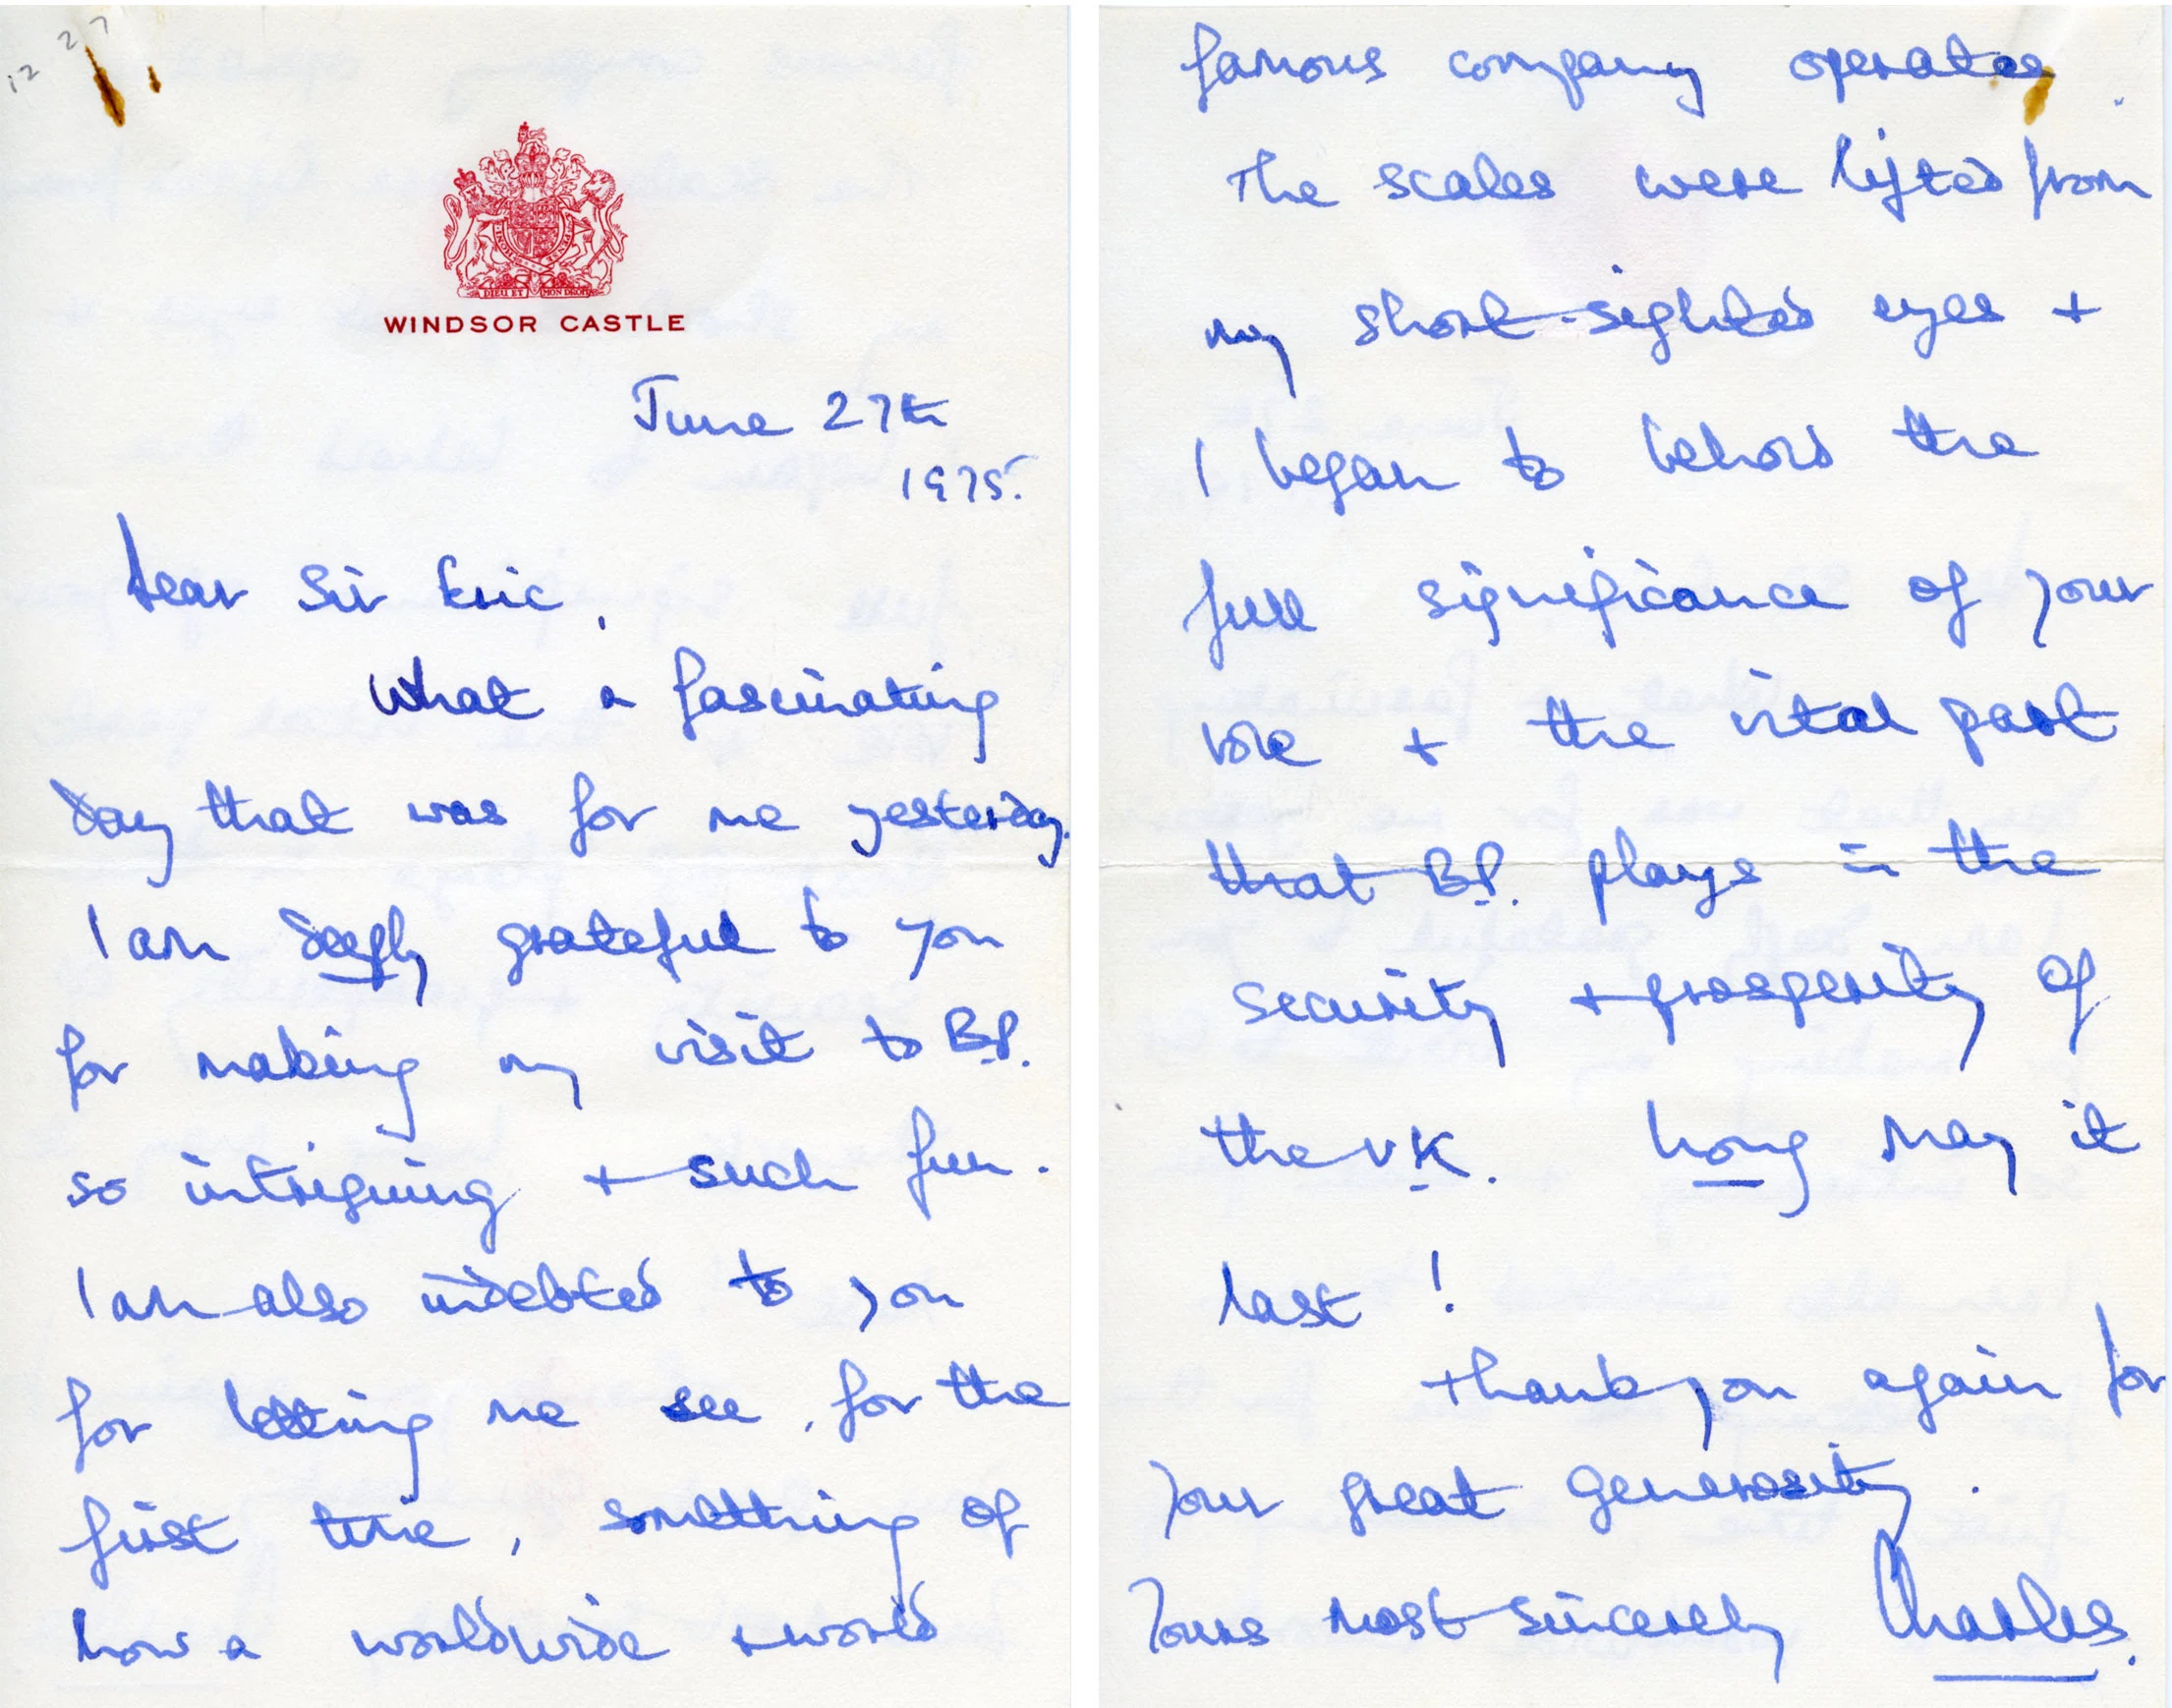 Prince Charles’s thank you letter to bp chairman Sir Eric Drake following the board meeting